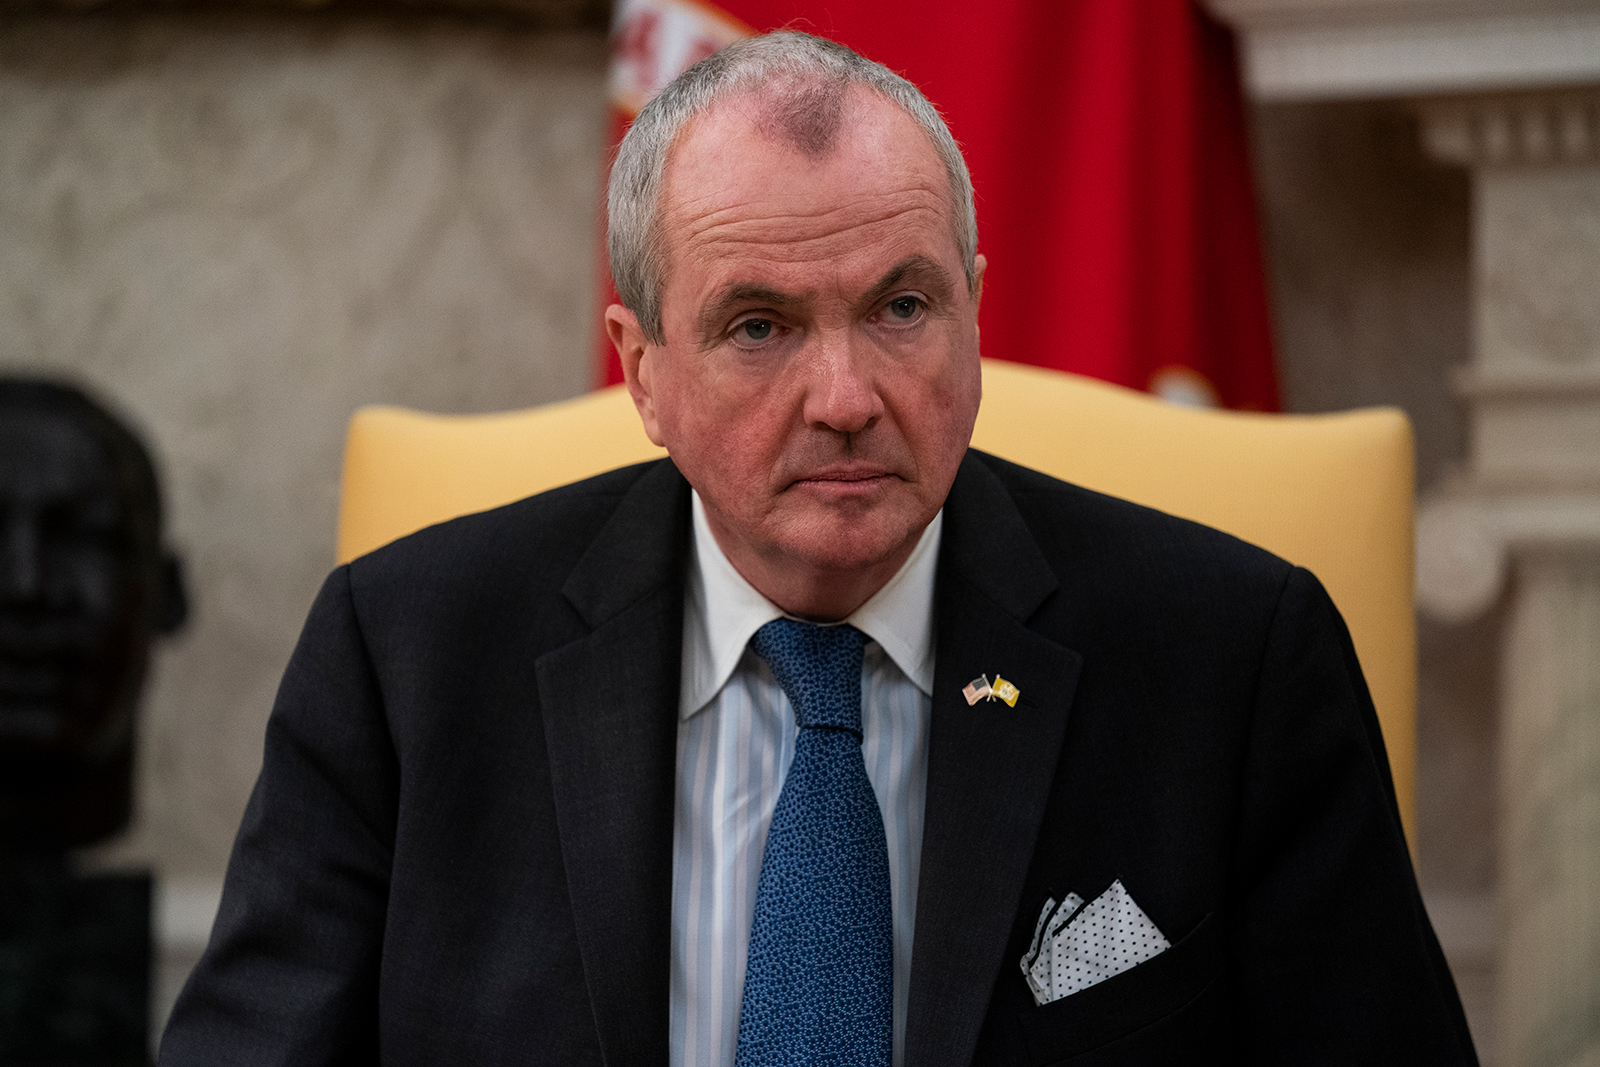 Gov. Phil Murphy listens to President Donald Trump during a meeting about the coronavirus response in the Oval Office on Thursday, April 30.